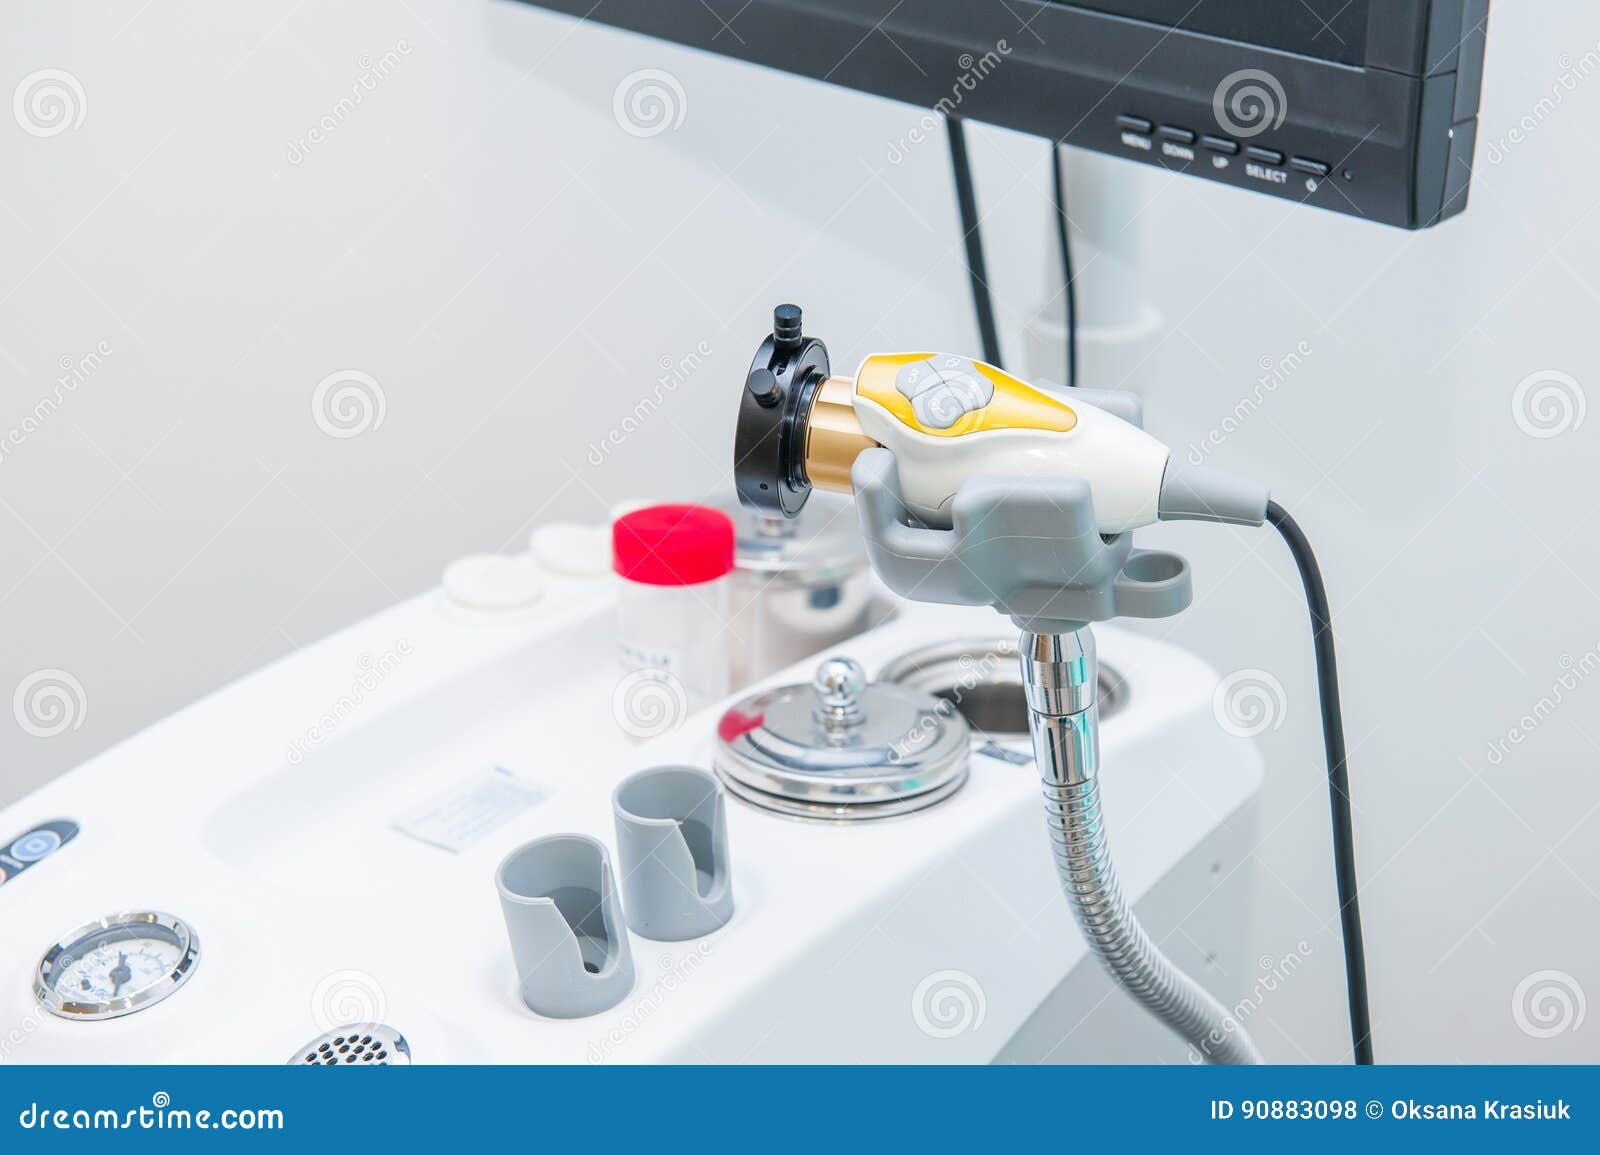 close up part of professional evo ent medical devices workstation. ear nose and throat medical equipment. washing syringe. selecti